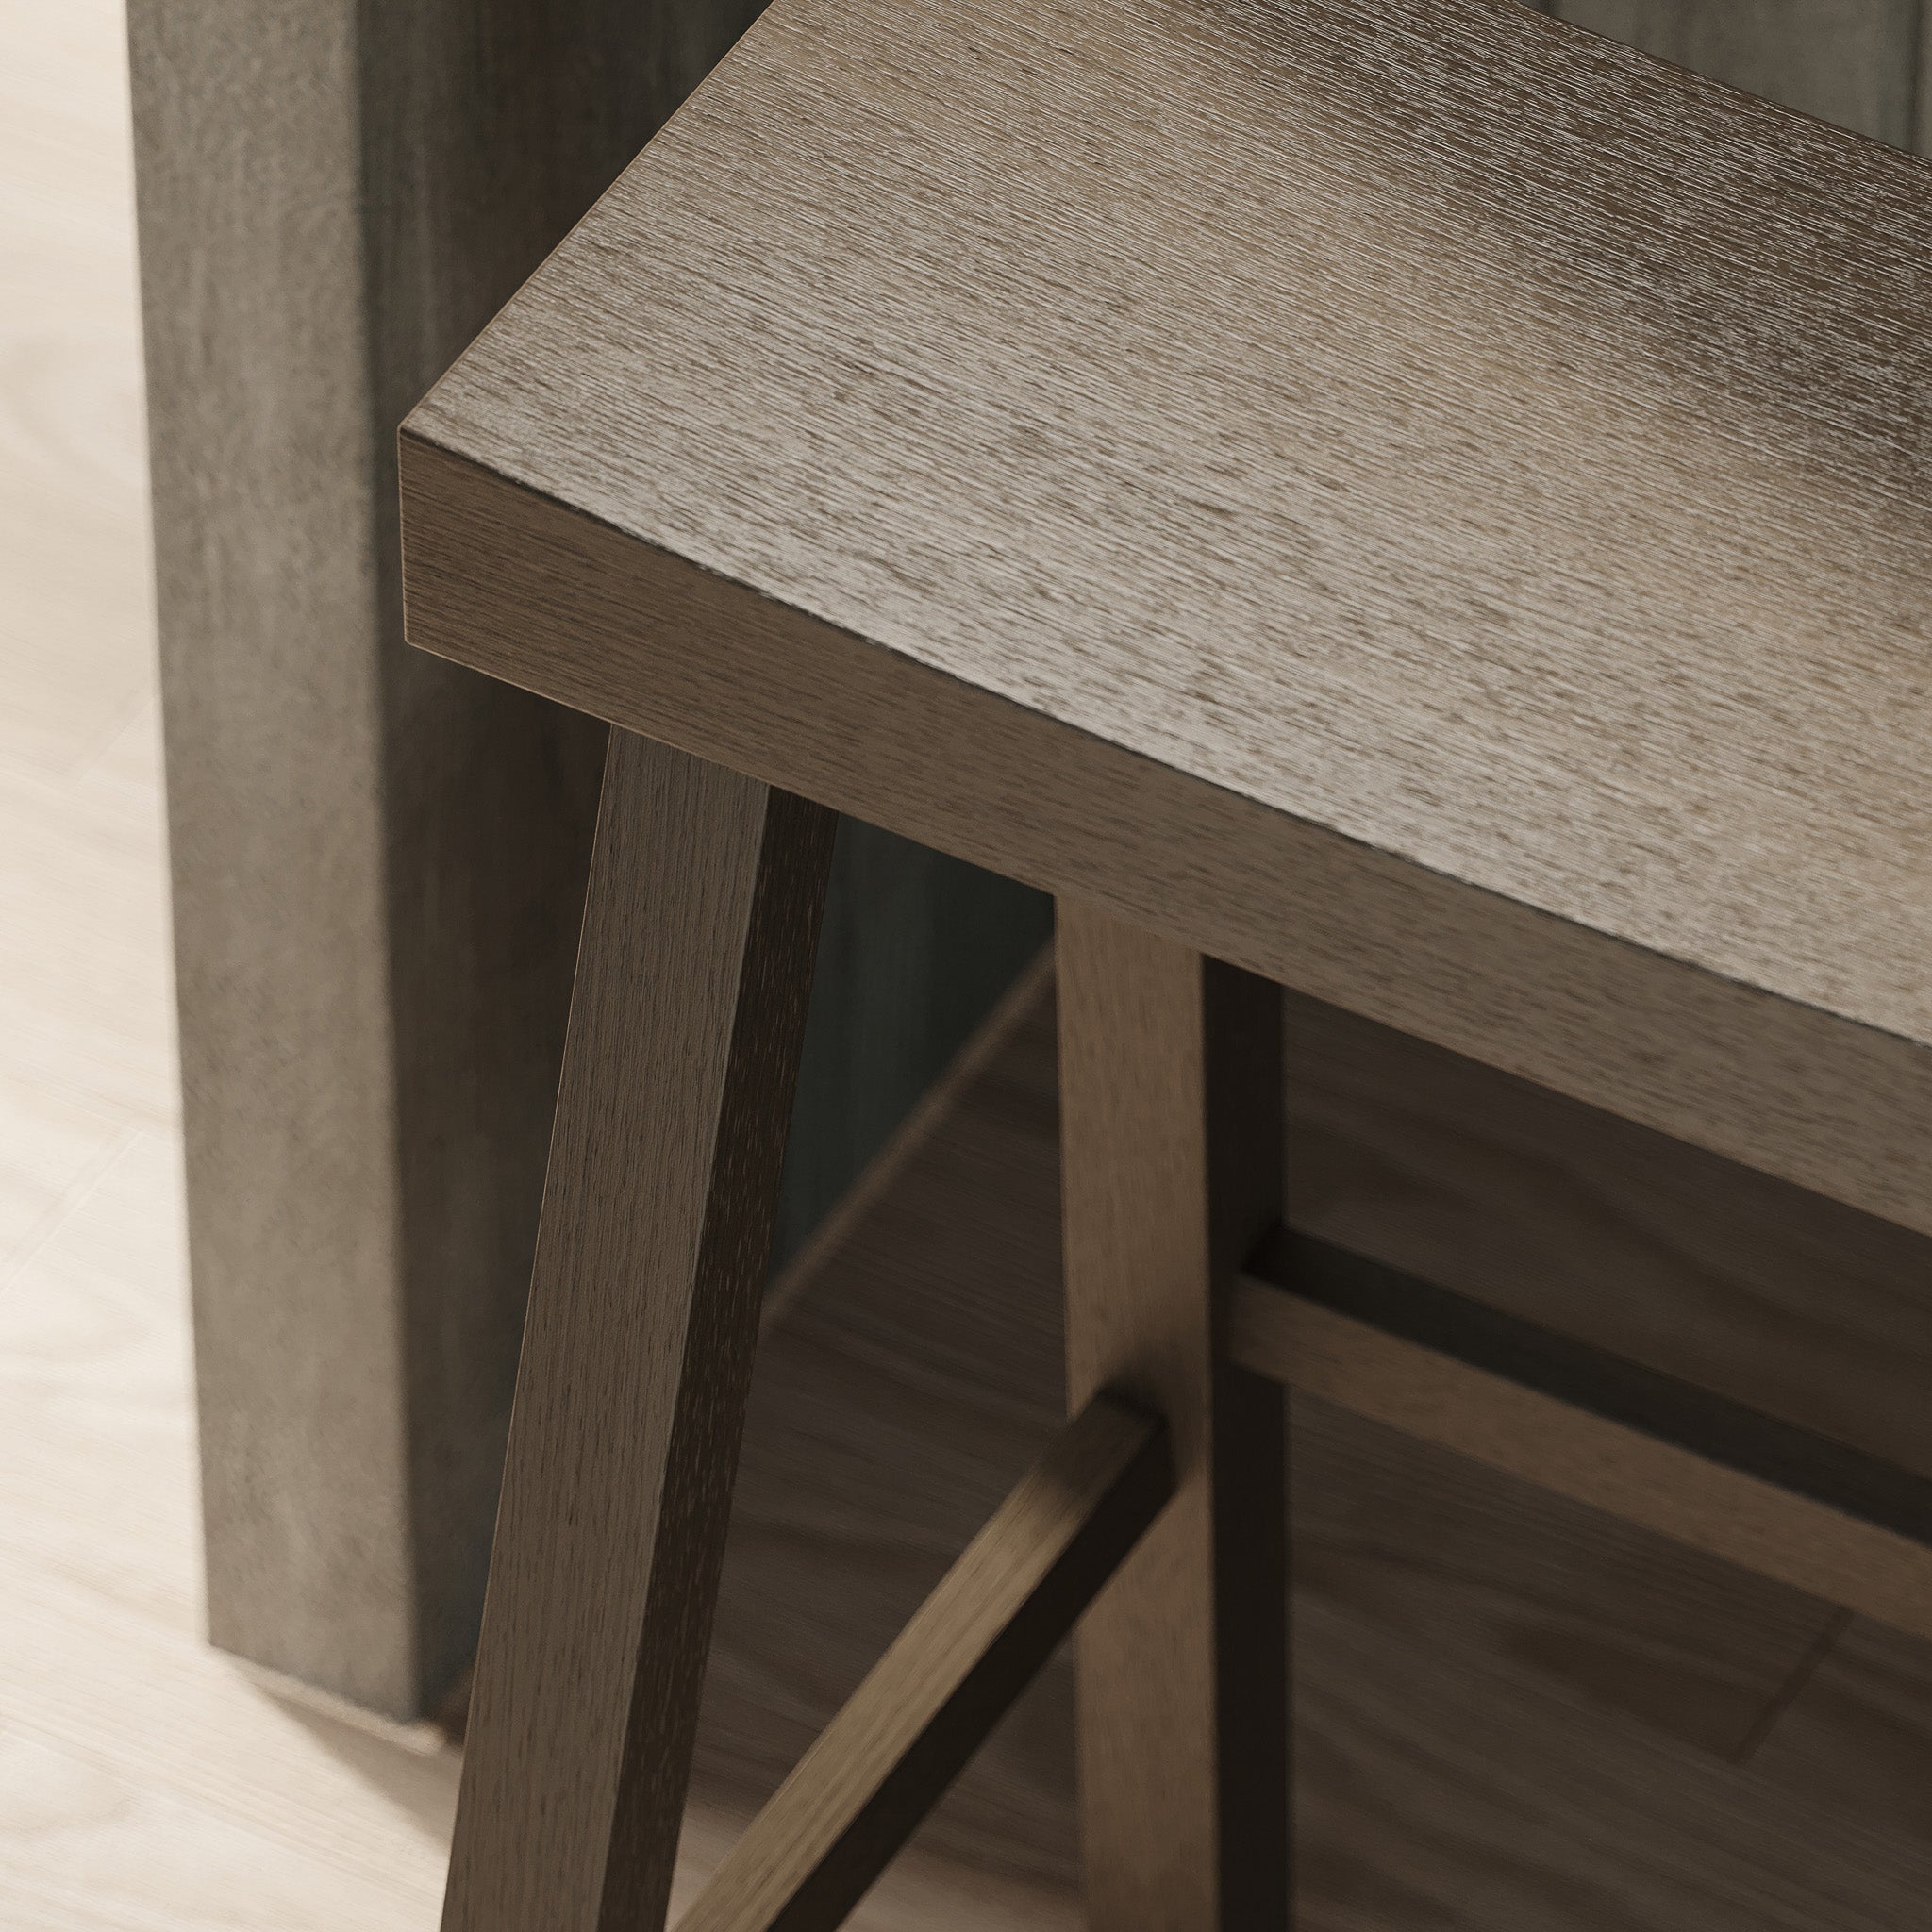 Vincent Bar Stool in Antiqued Grey Finish in Stools by Maven Lane